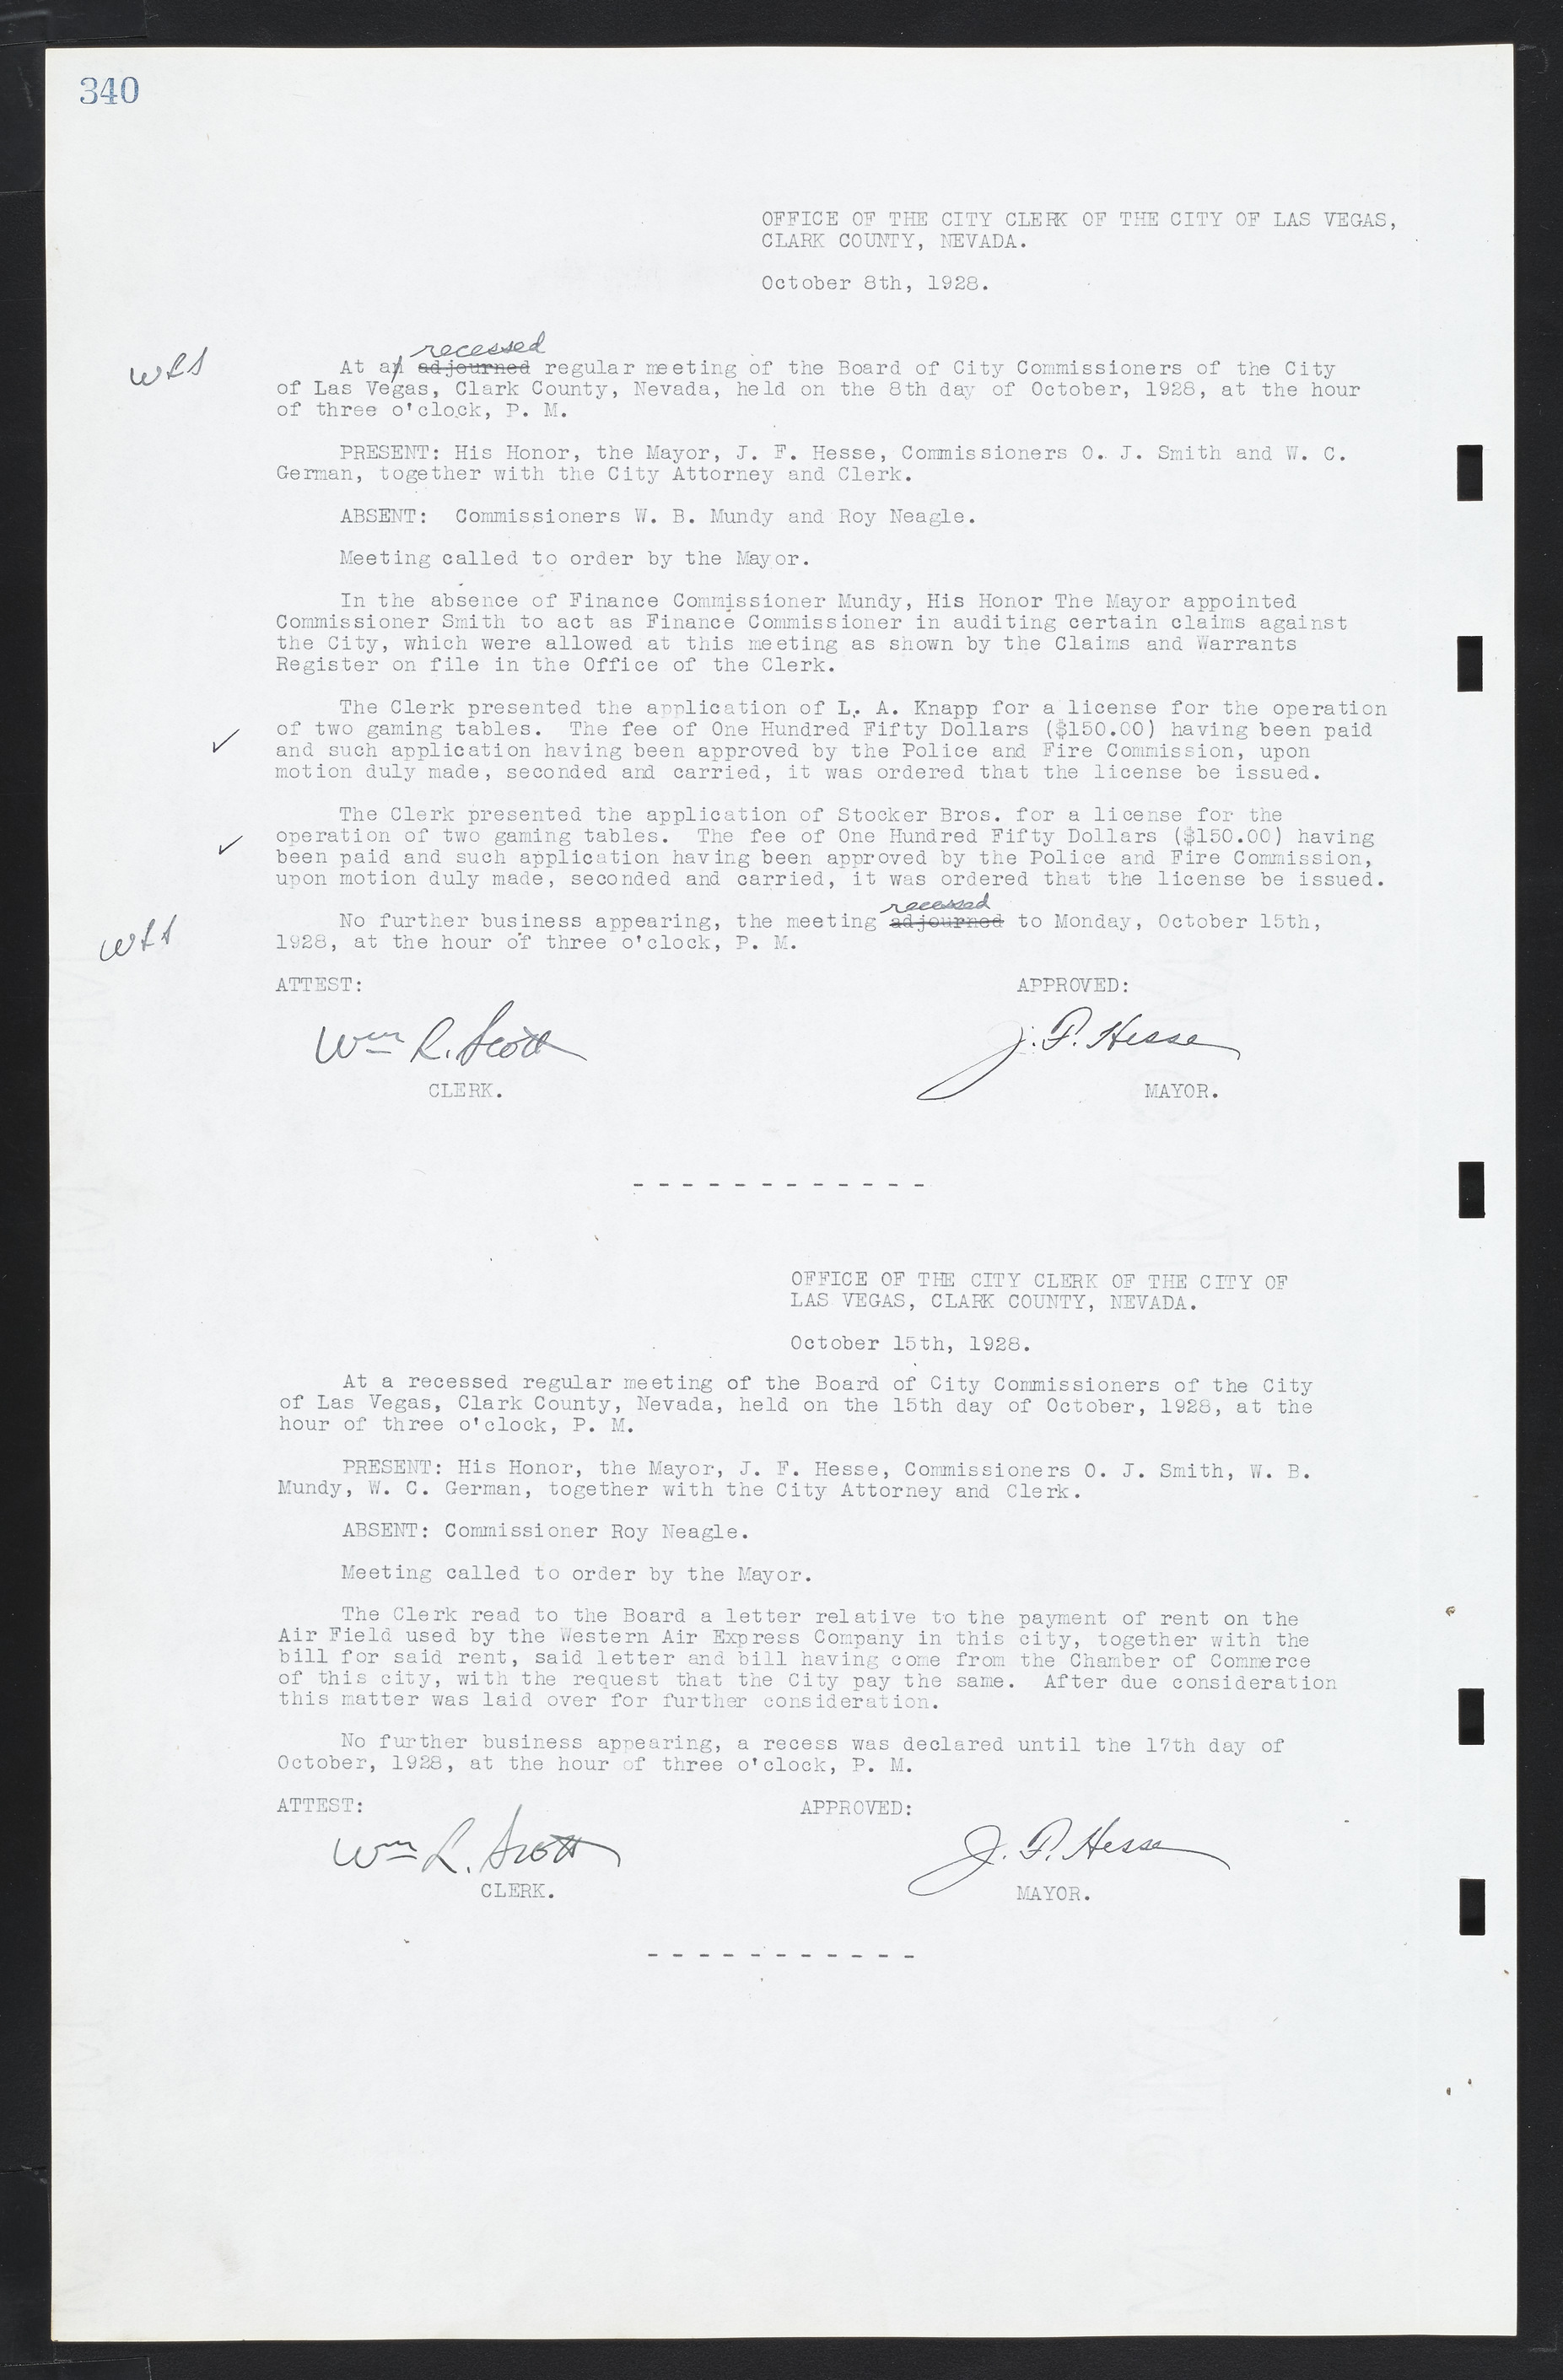 Las Vegas City Commission Minutes, March 1, 1922 to May 10, 1929, lvc000002-349